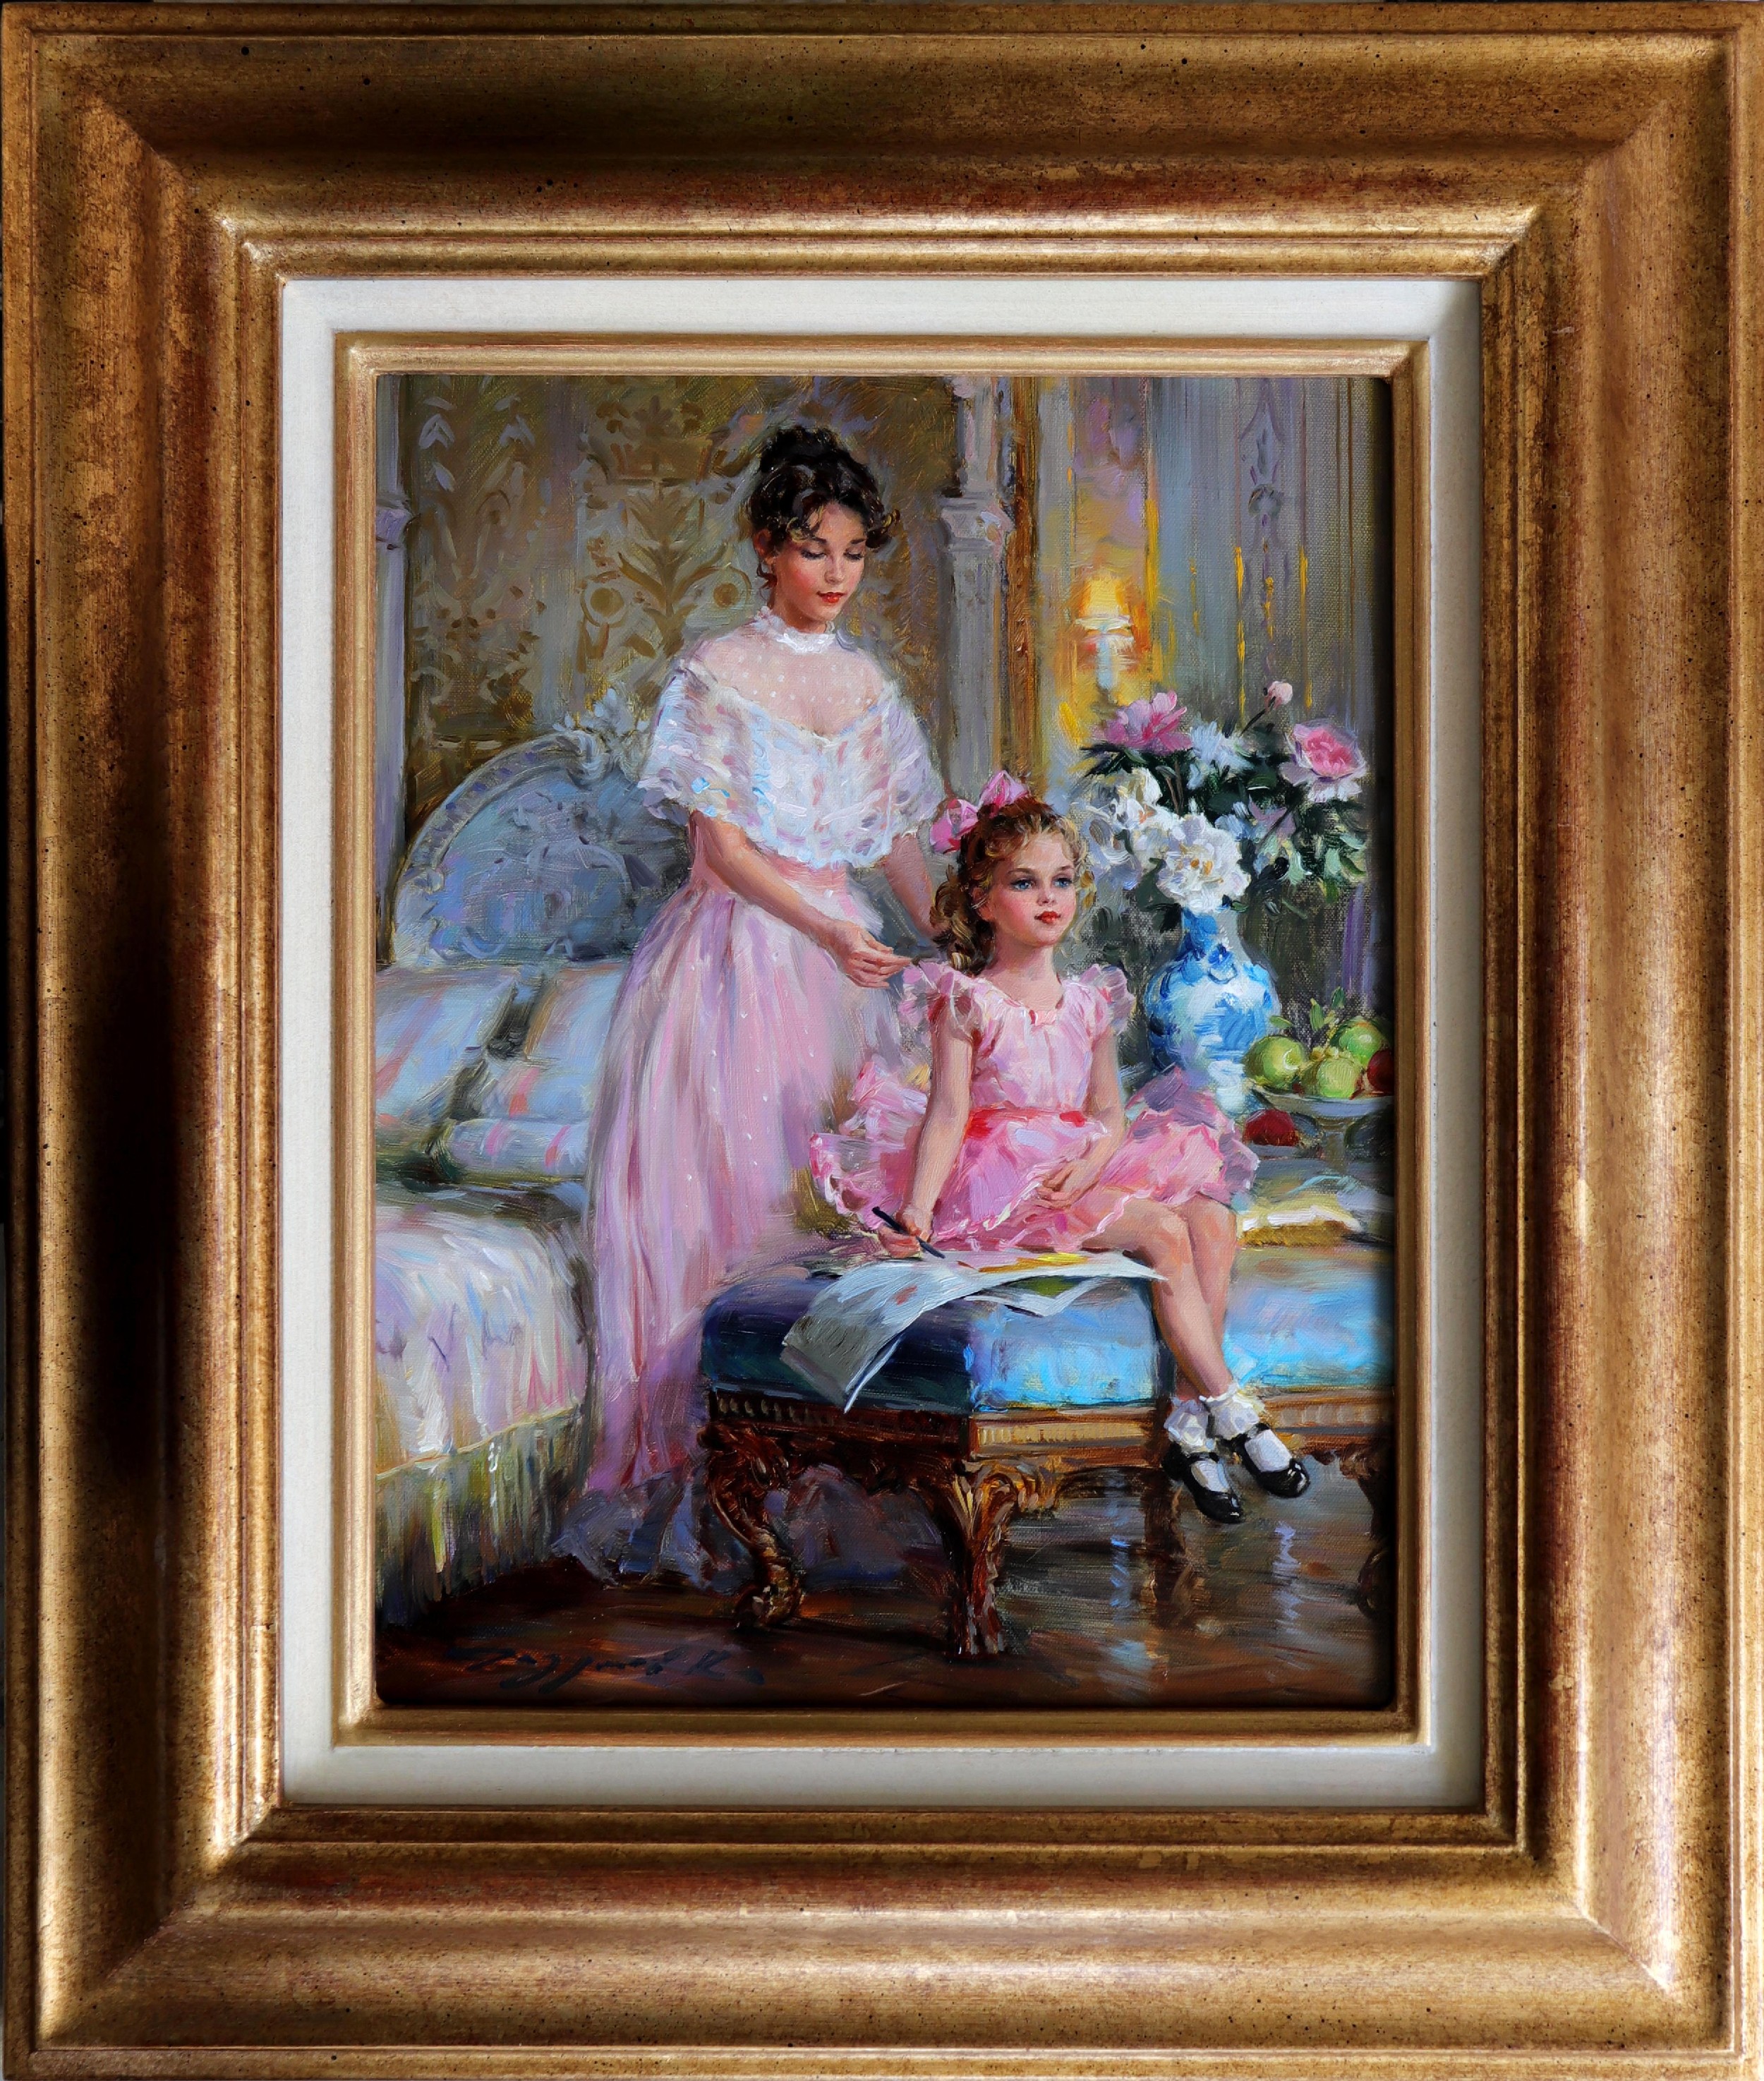 Konstantin Razumov (1974- ) Russian. "In the Bedroom", An Elegant Woman with a Young Girl writing, - Image 2 of 4